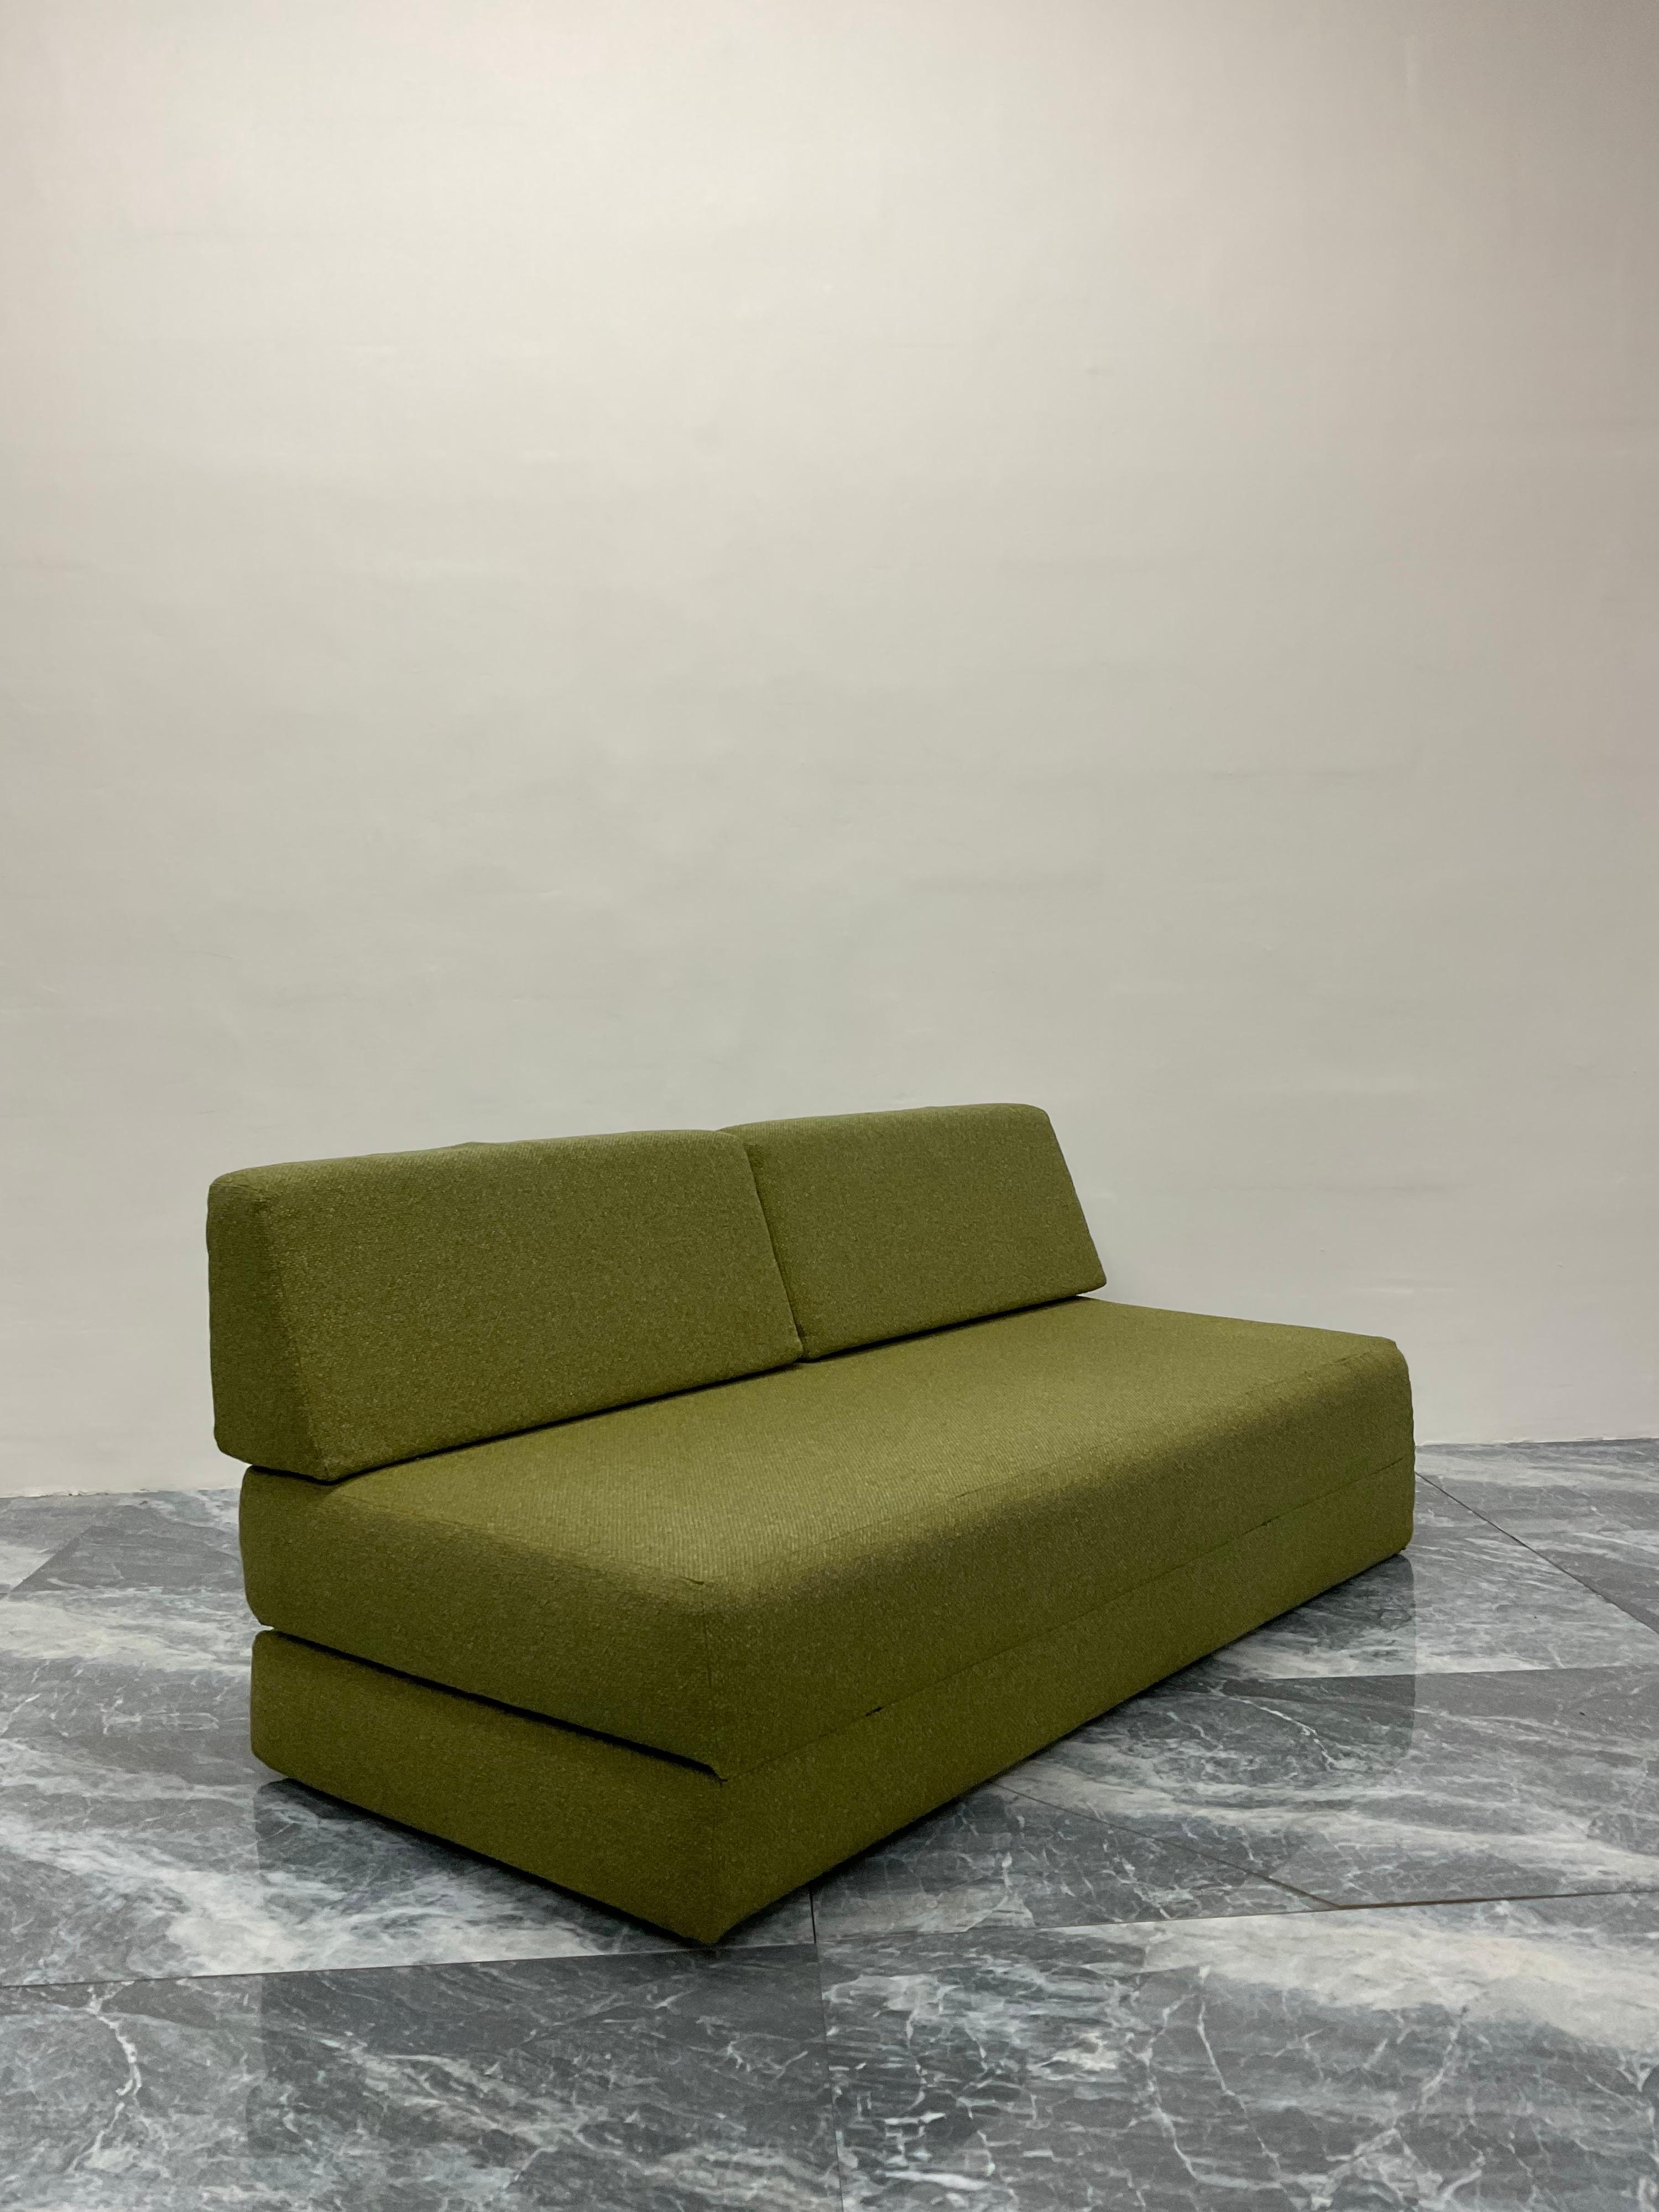 Mid-century vintage green fabric sofa that folds out into a bed, 1970s. Tubular metal frame and backrest for support.

Bed Dimensions:
W 61